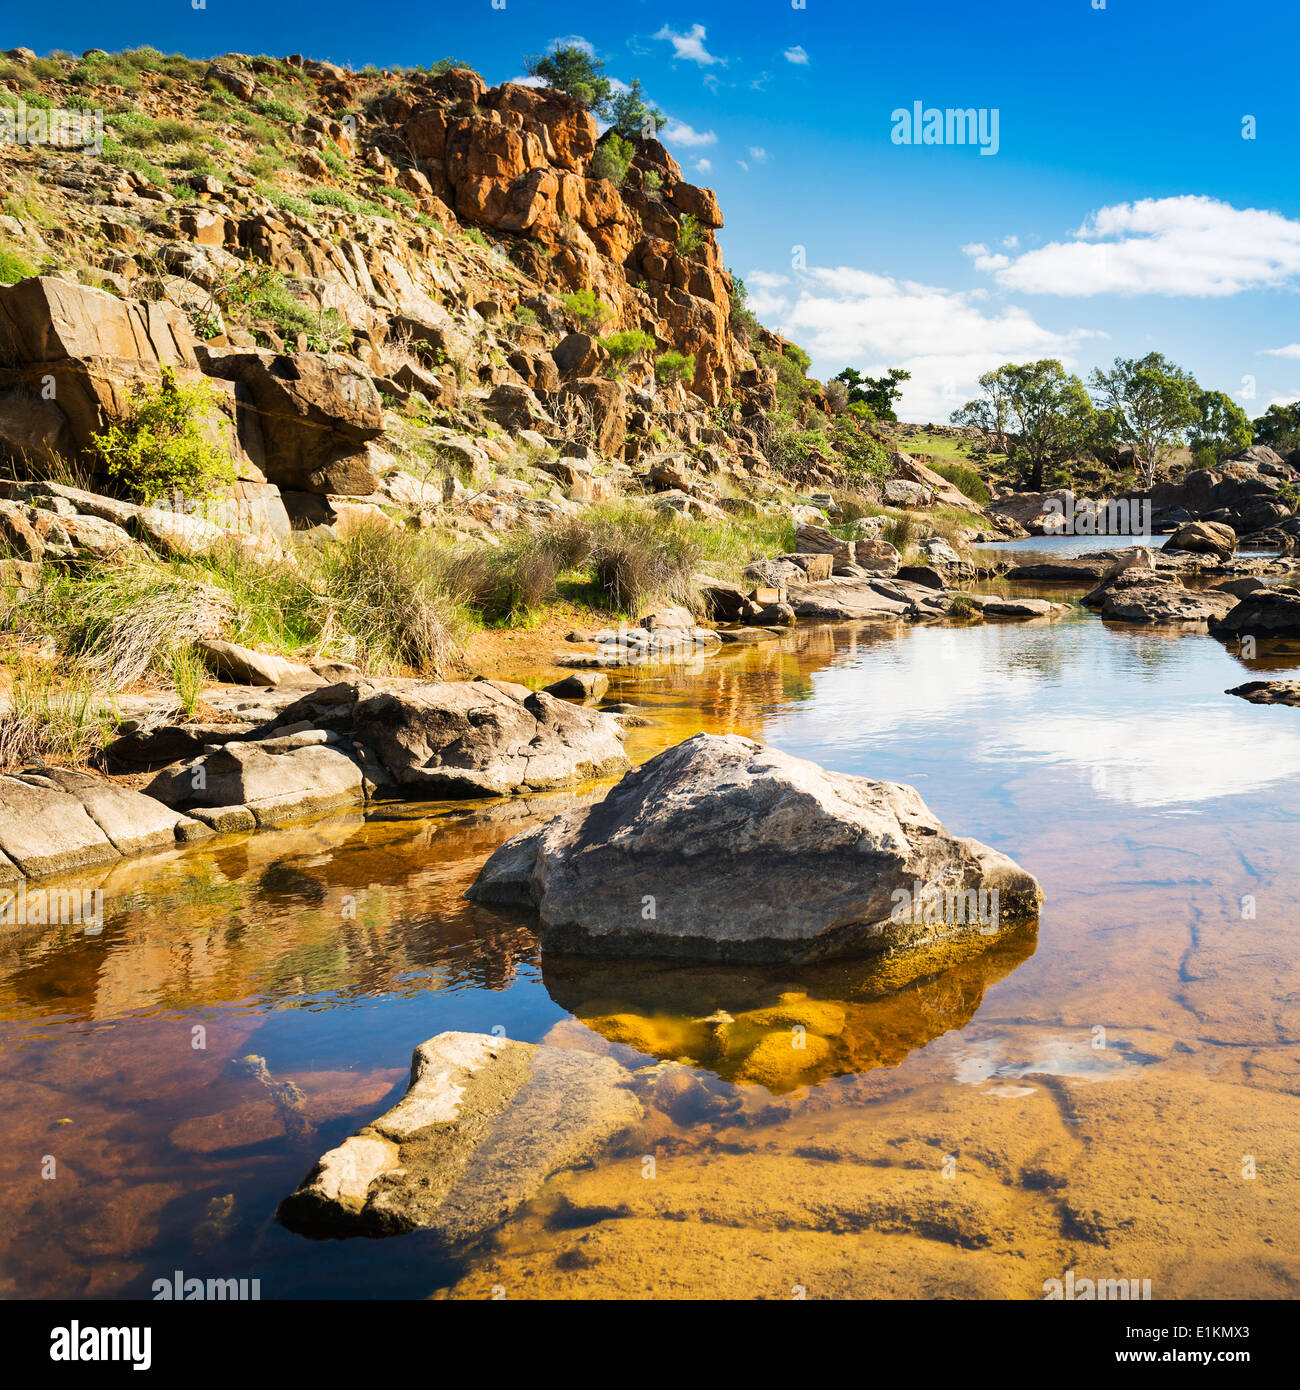 A beautiful oasis in rural outback Australia Stock Photo